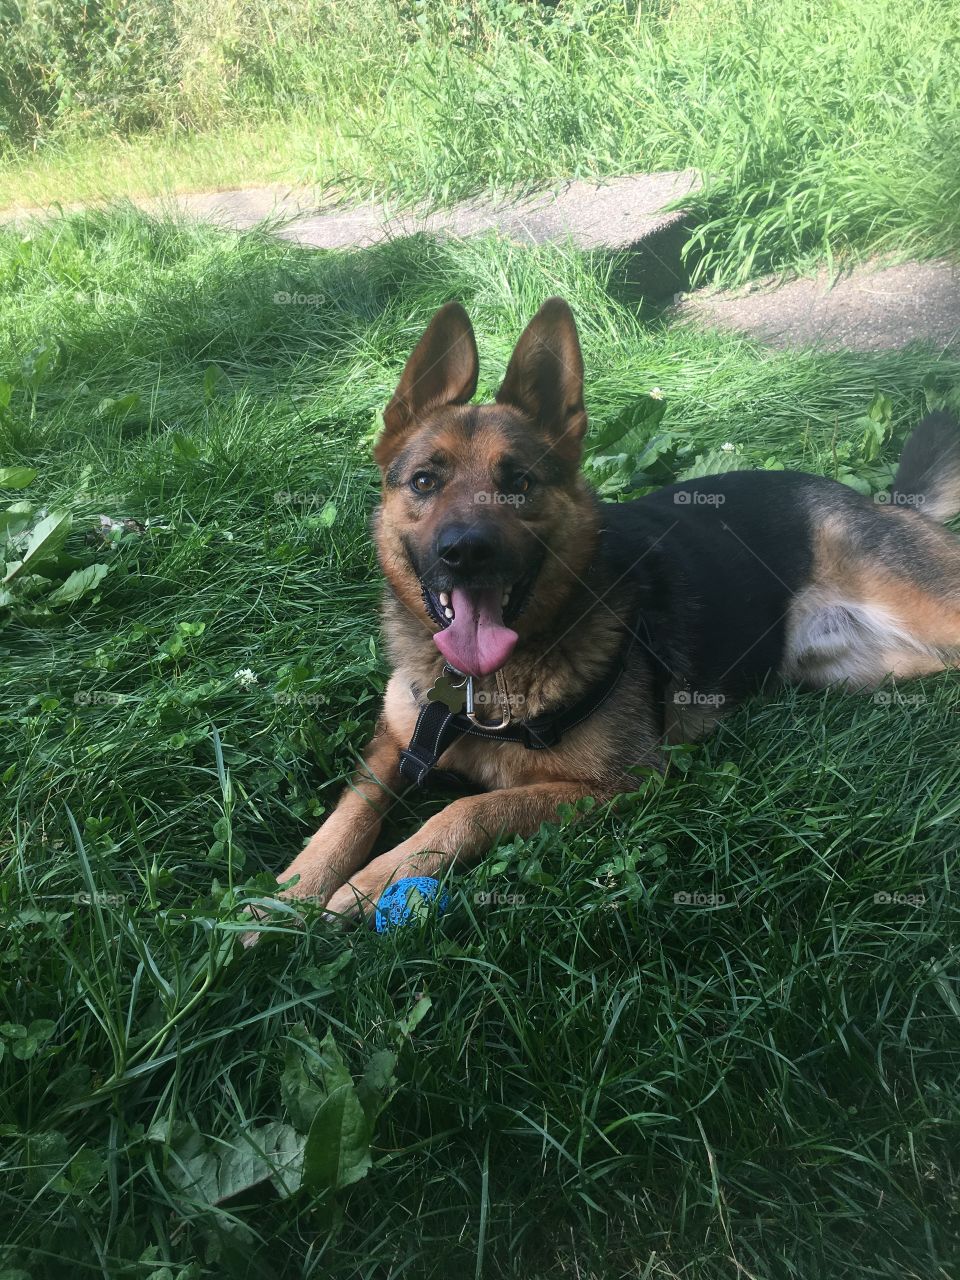 A German Shepherd dog lays in the grass with its tongue out, with a blue ball waiting next to its paws.